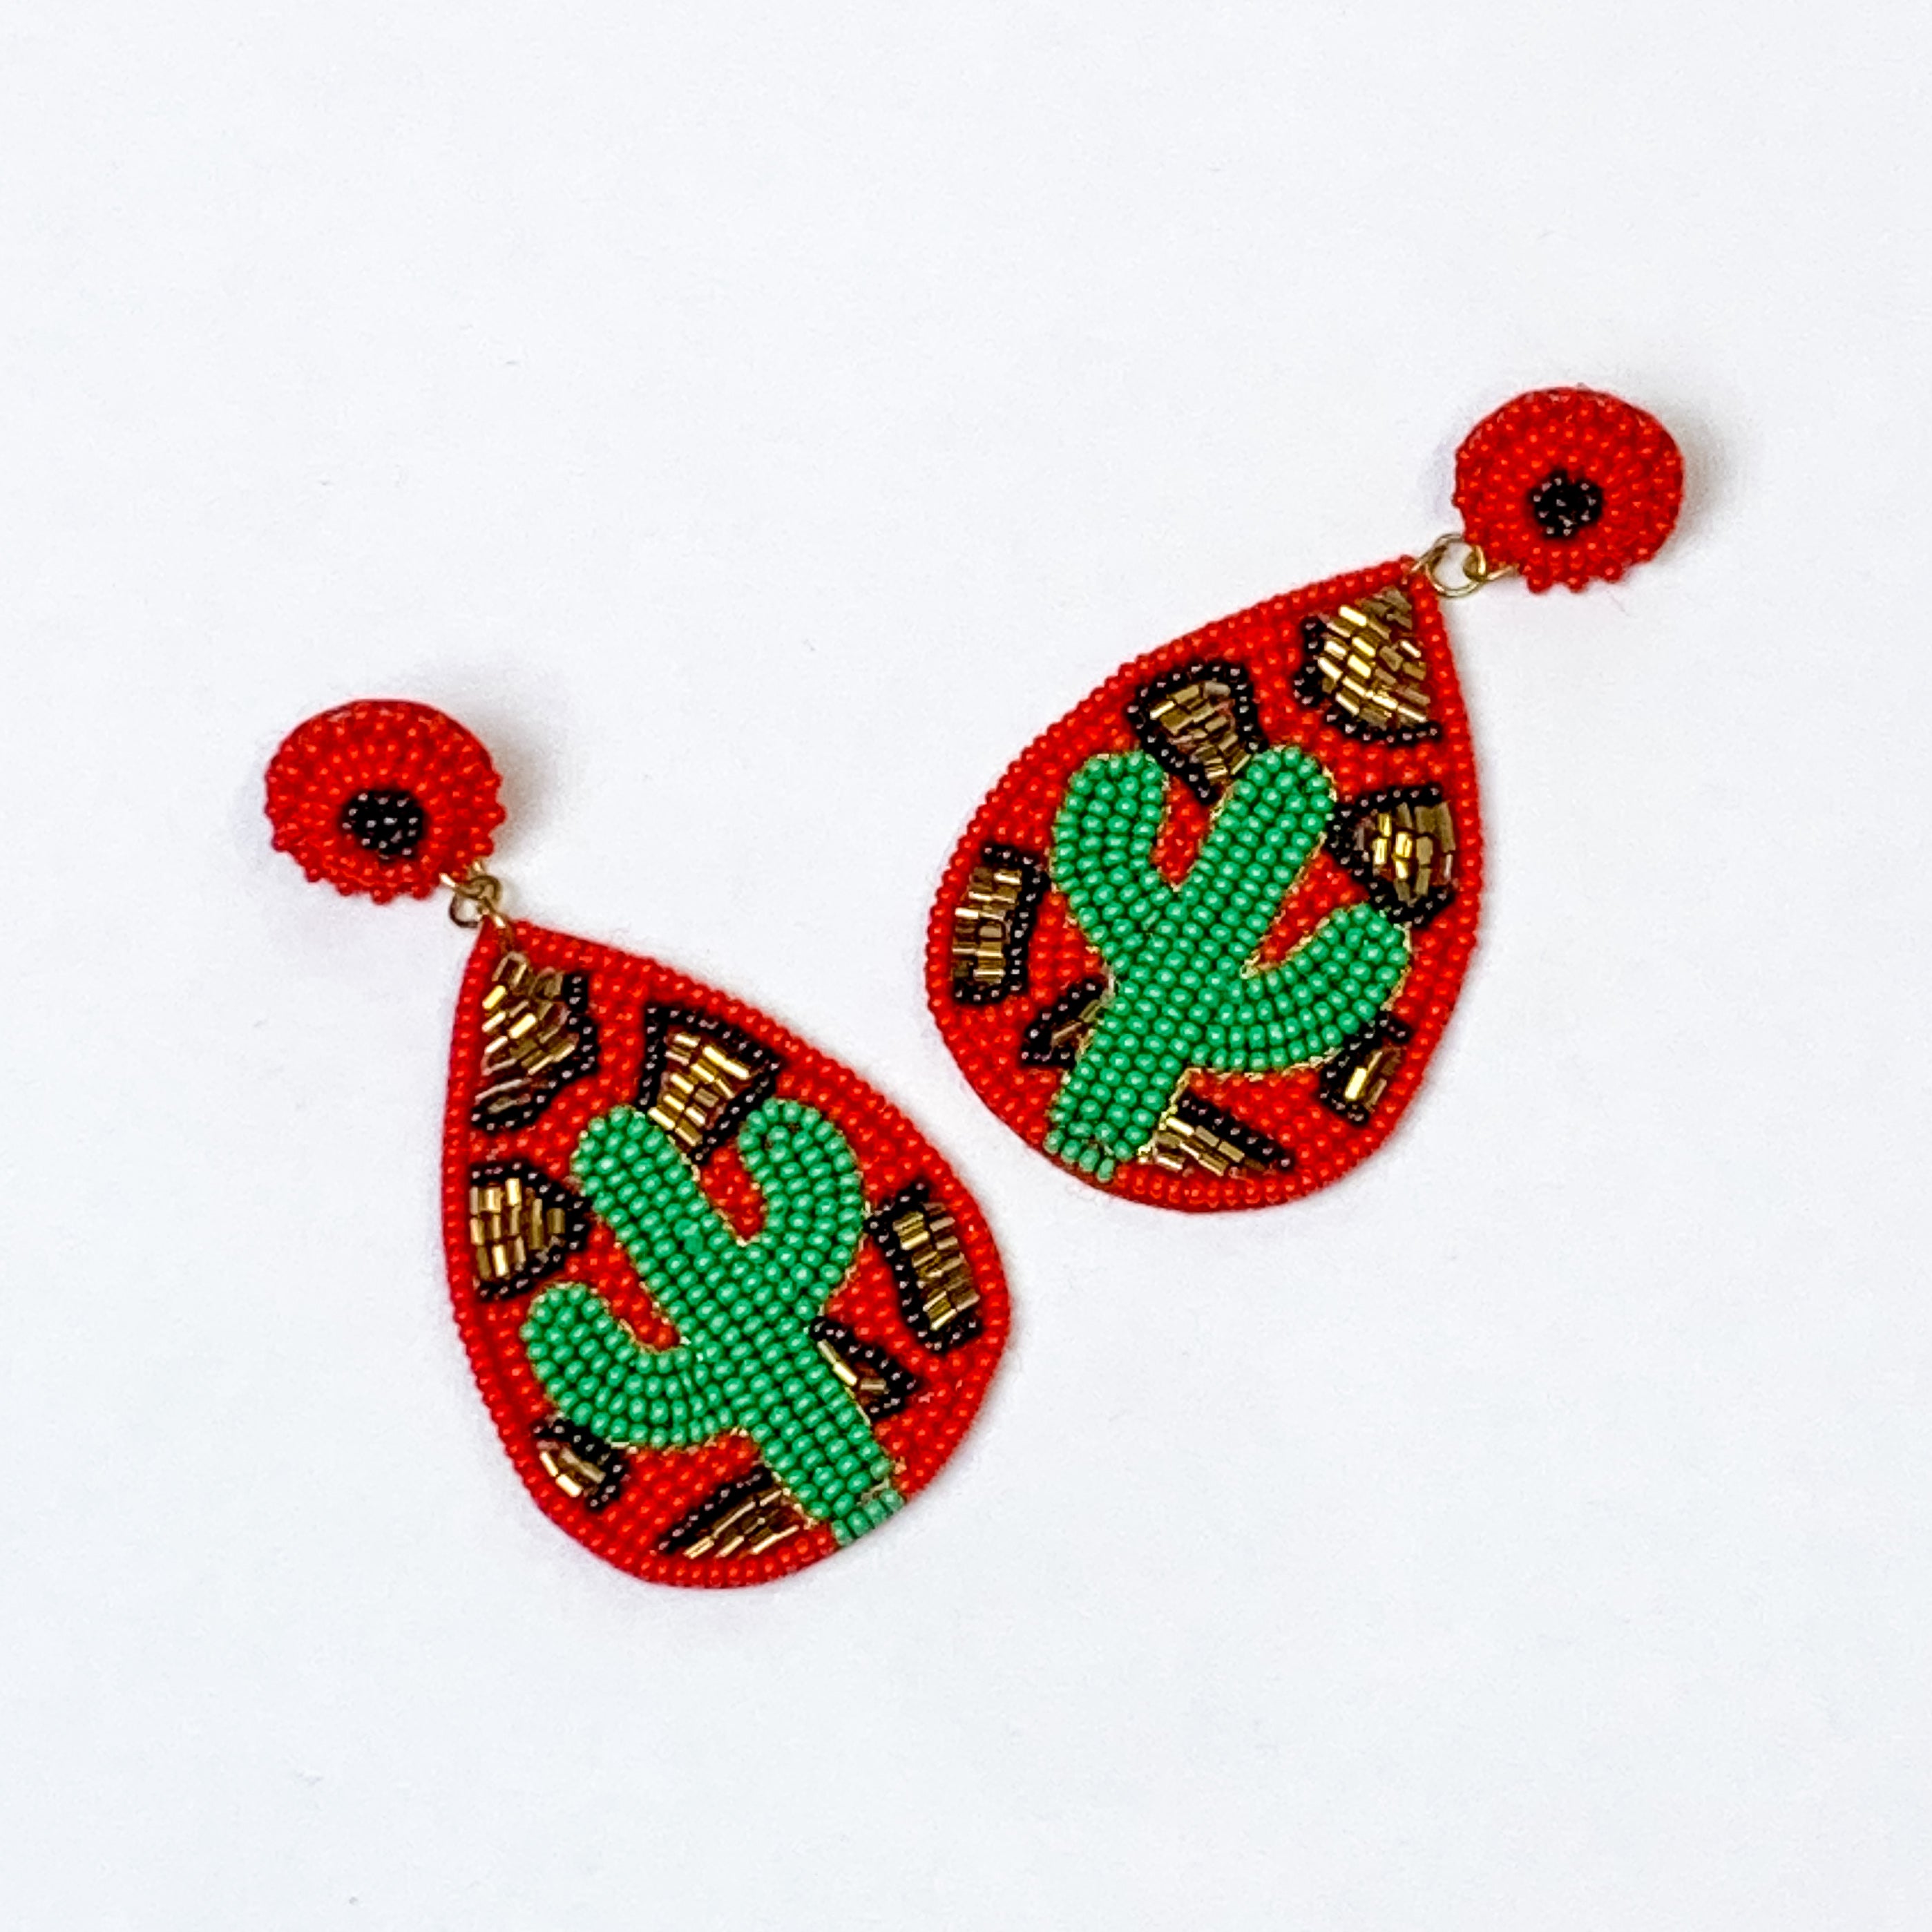 Cactus and Leopard Print Seed Bead Teardrop Earrings In Red and Green - Giddy Up Glamour Boutique